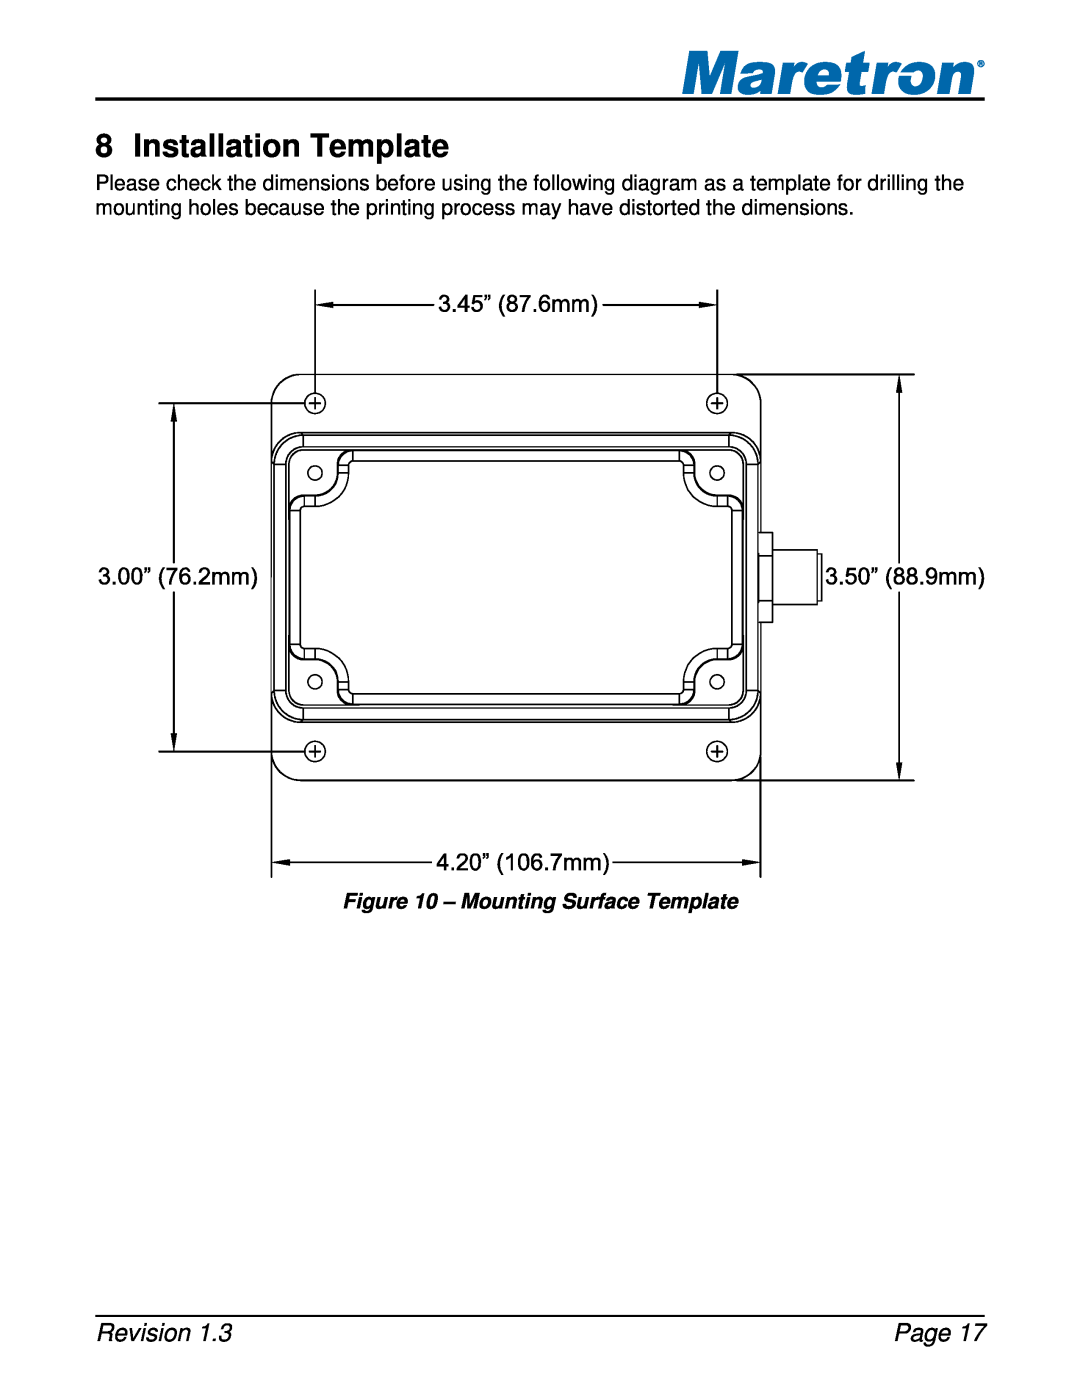 Maretron FPM100 user manual Installation Template, Mounting Surface Template, Revision, Page 